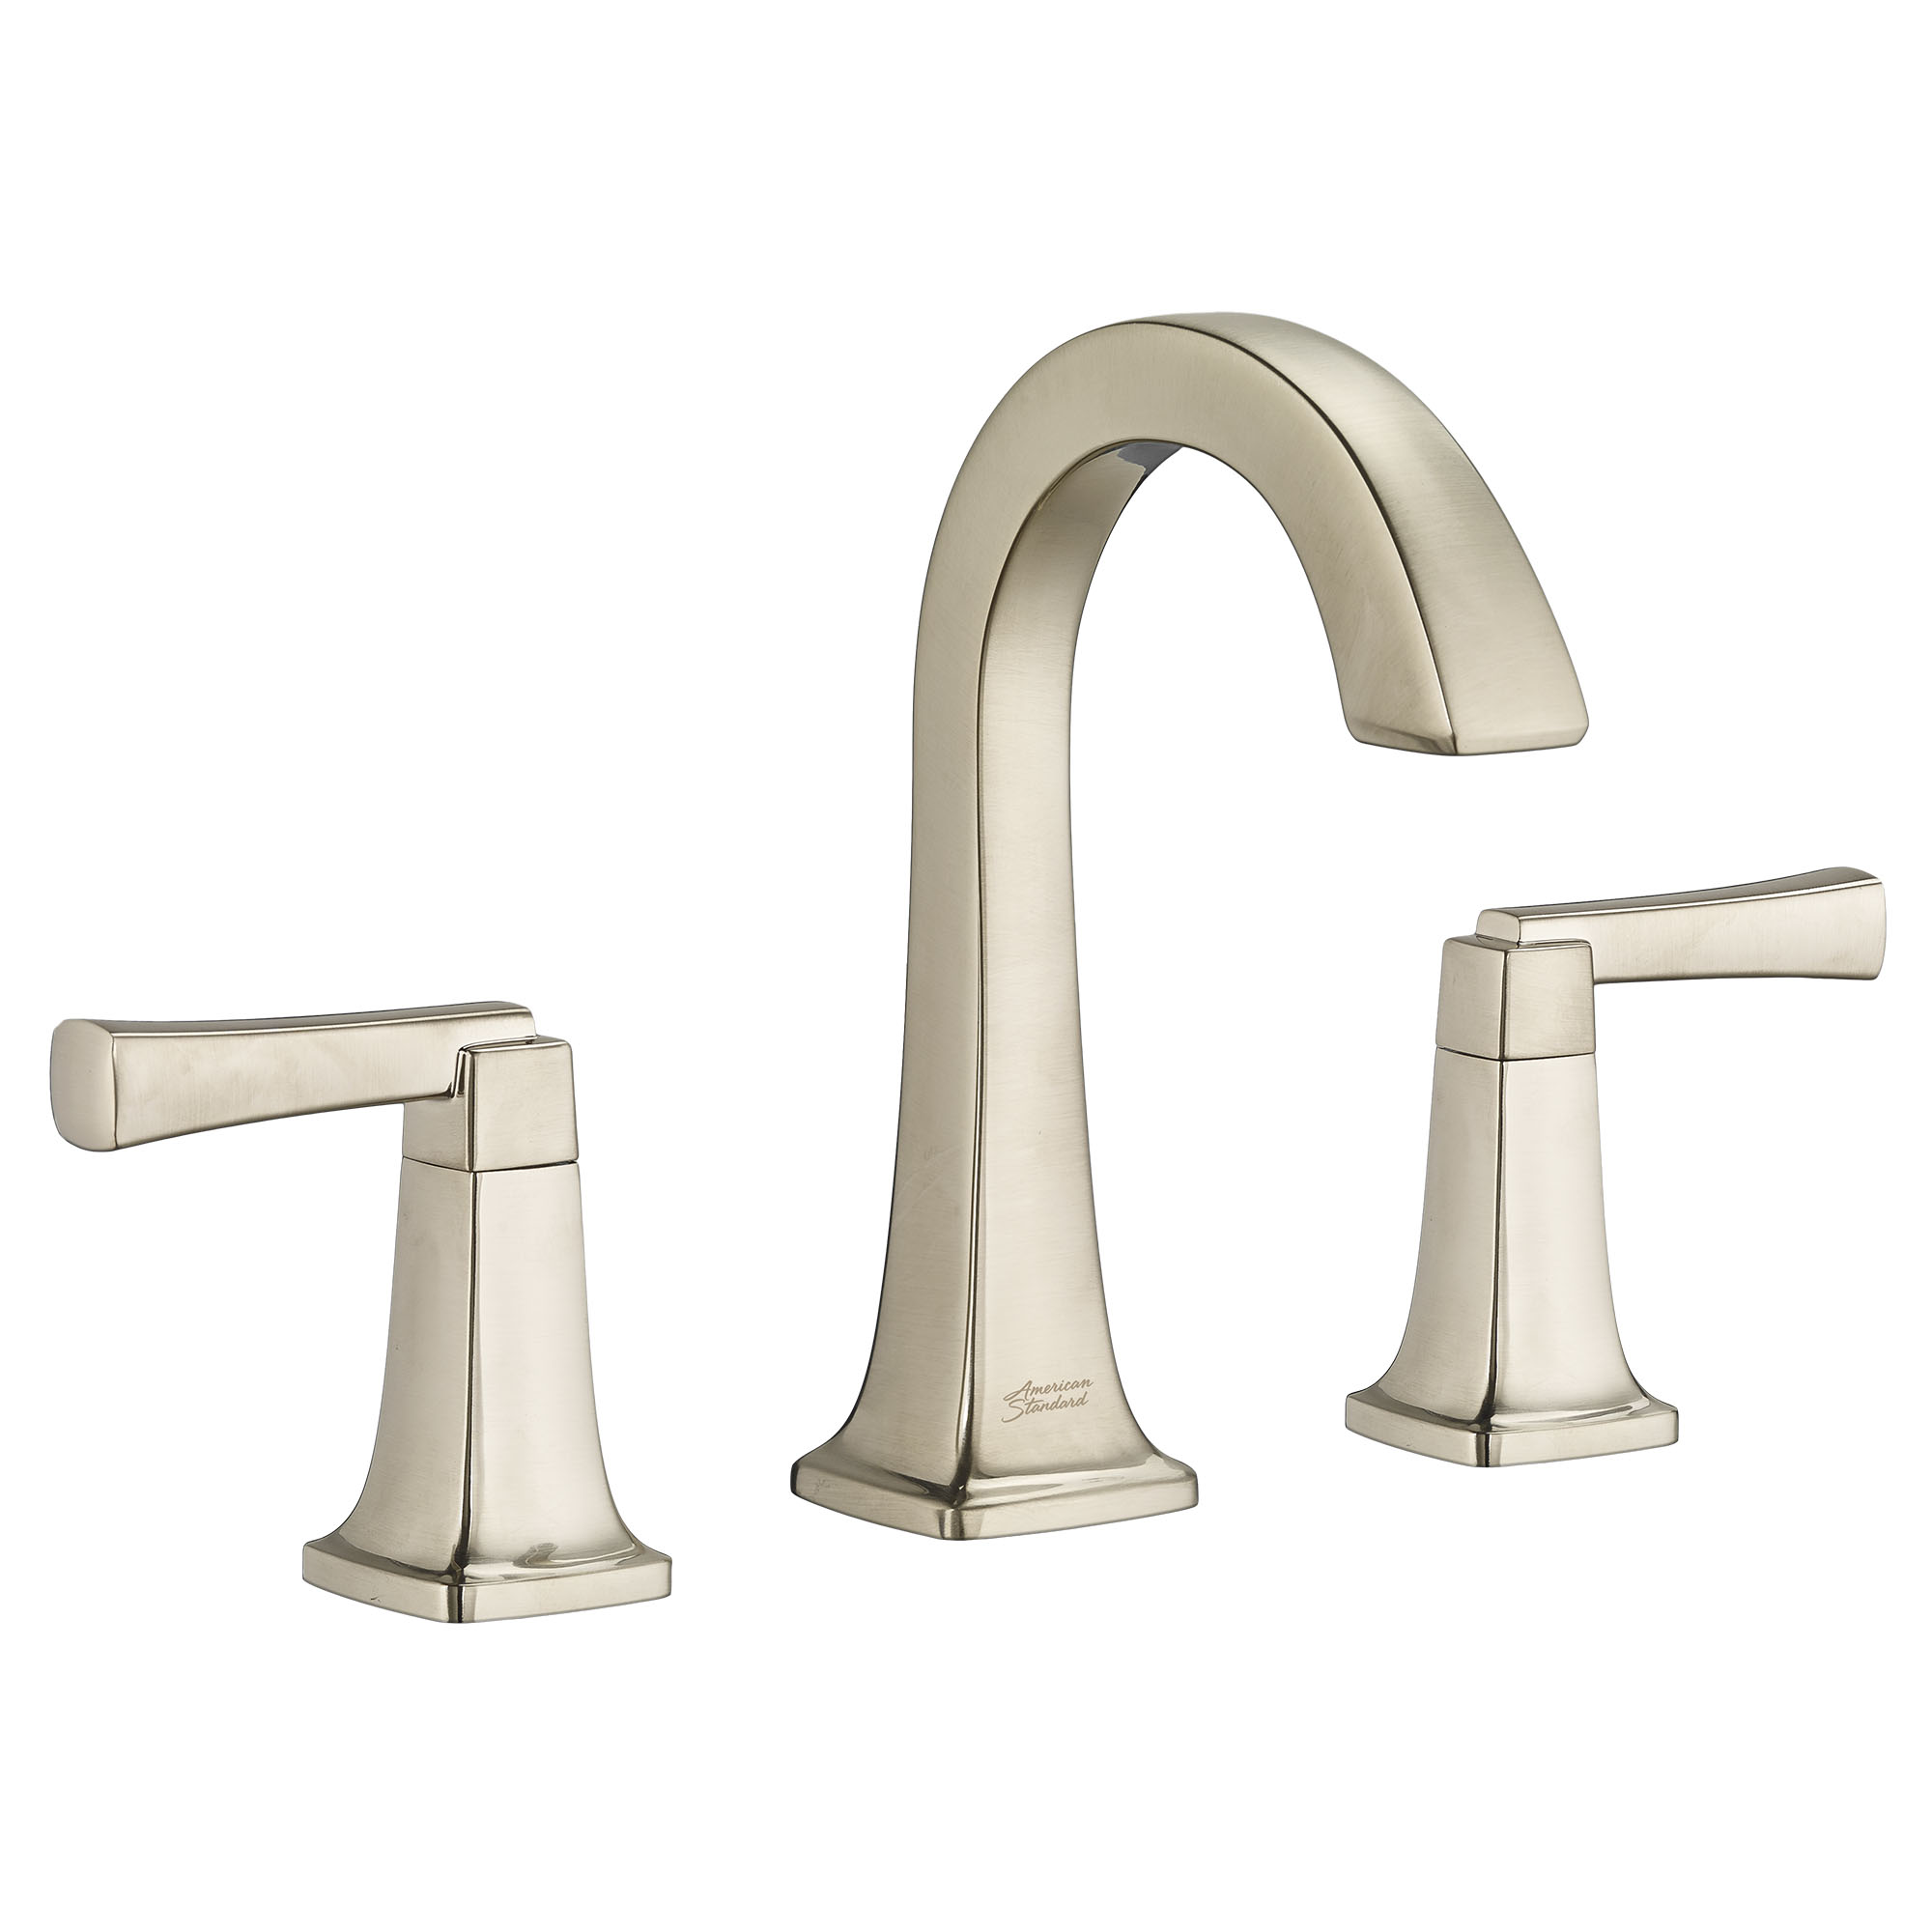 Townsend® 8-Inch Widespread 2-Handle Bathroom Faucet 1.2 gpm/4.5 L/min